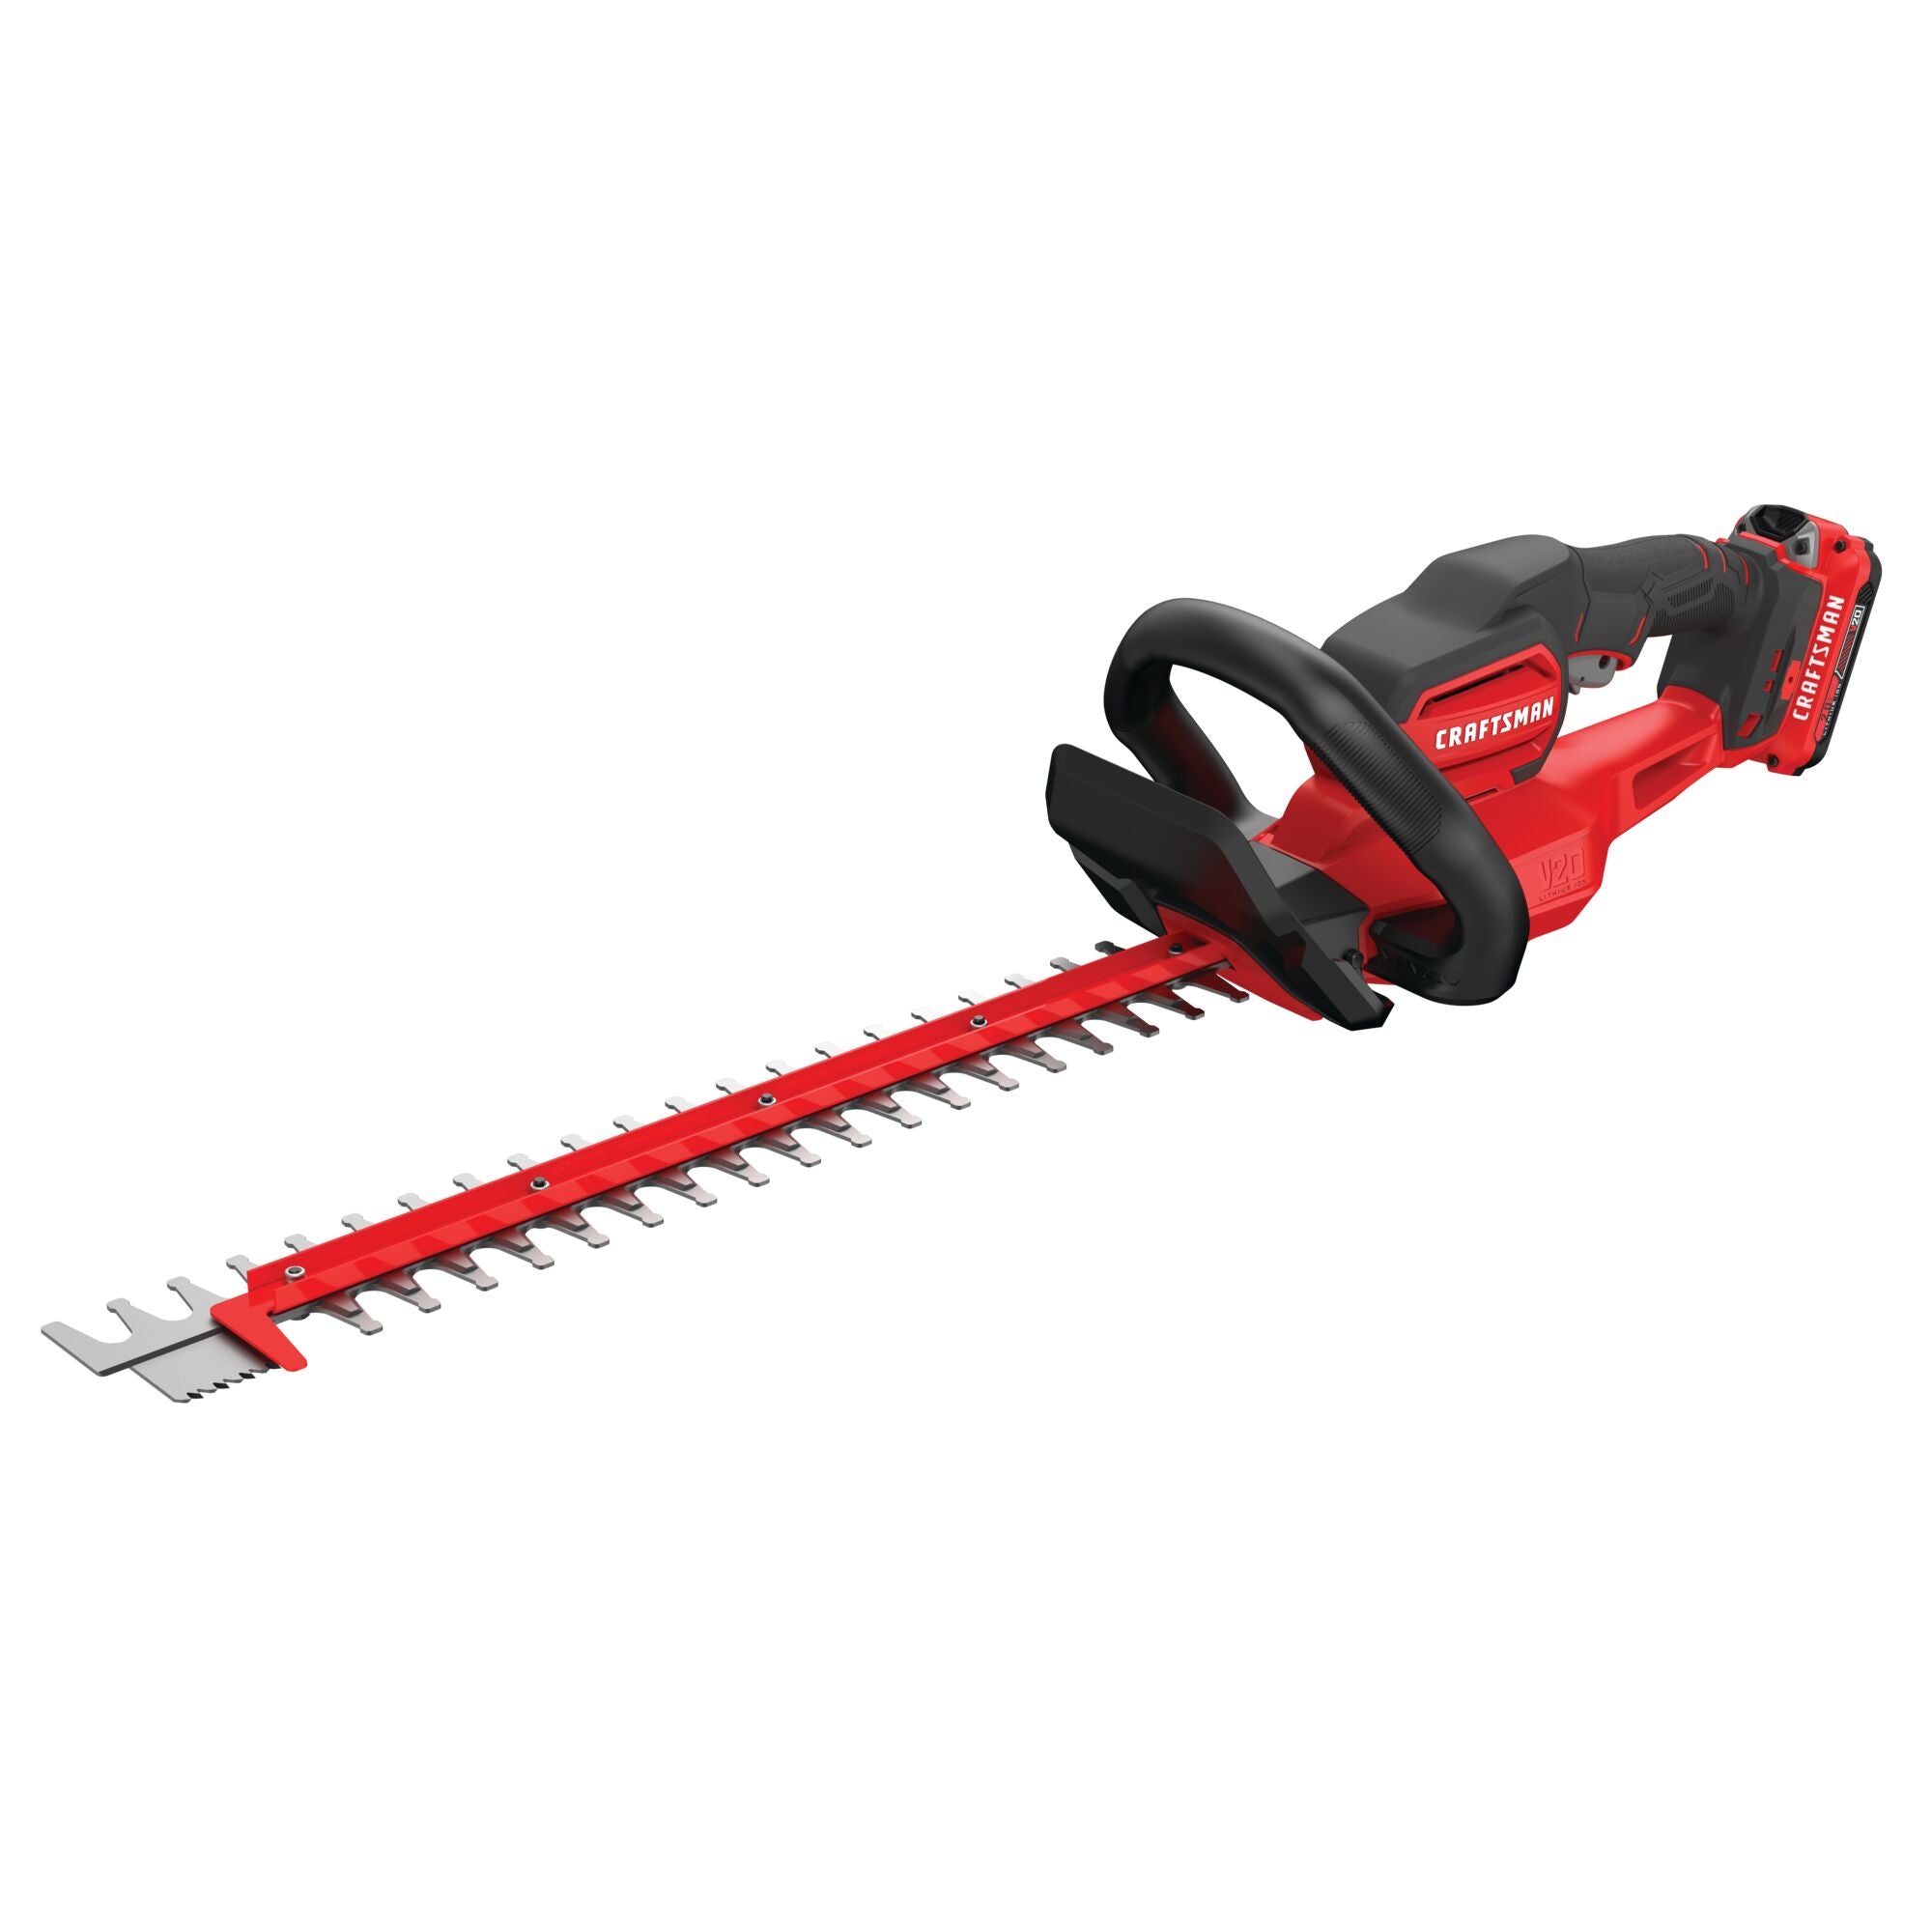 Right profile  view of cordless 22 inch hedge trimmer kit 2 ampere hours.